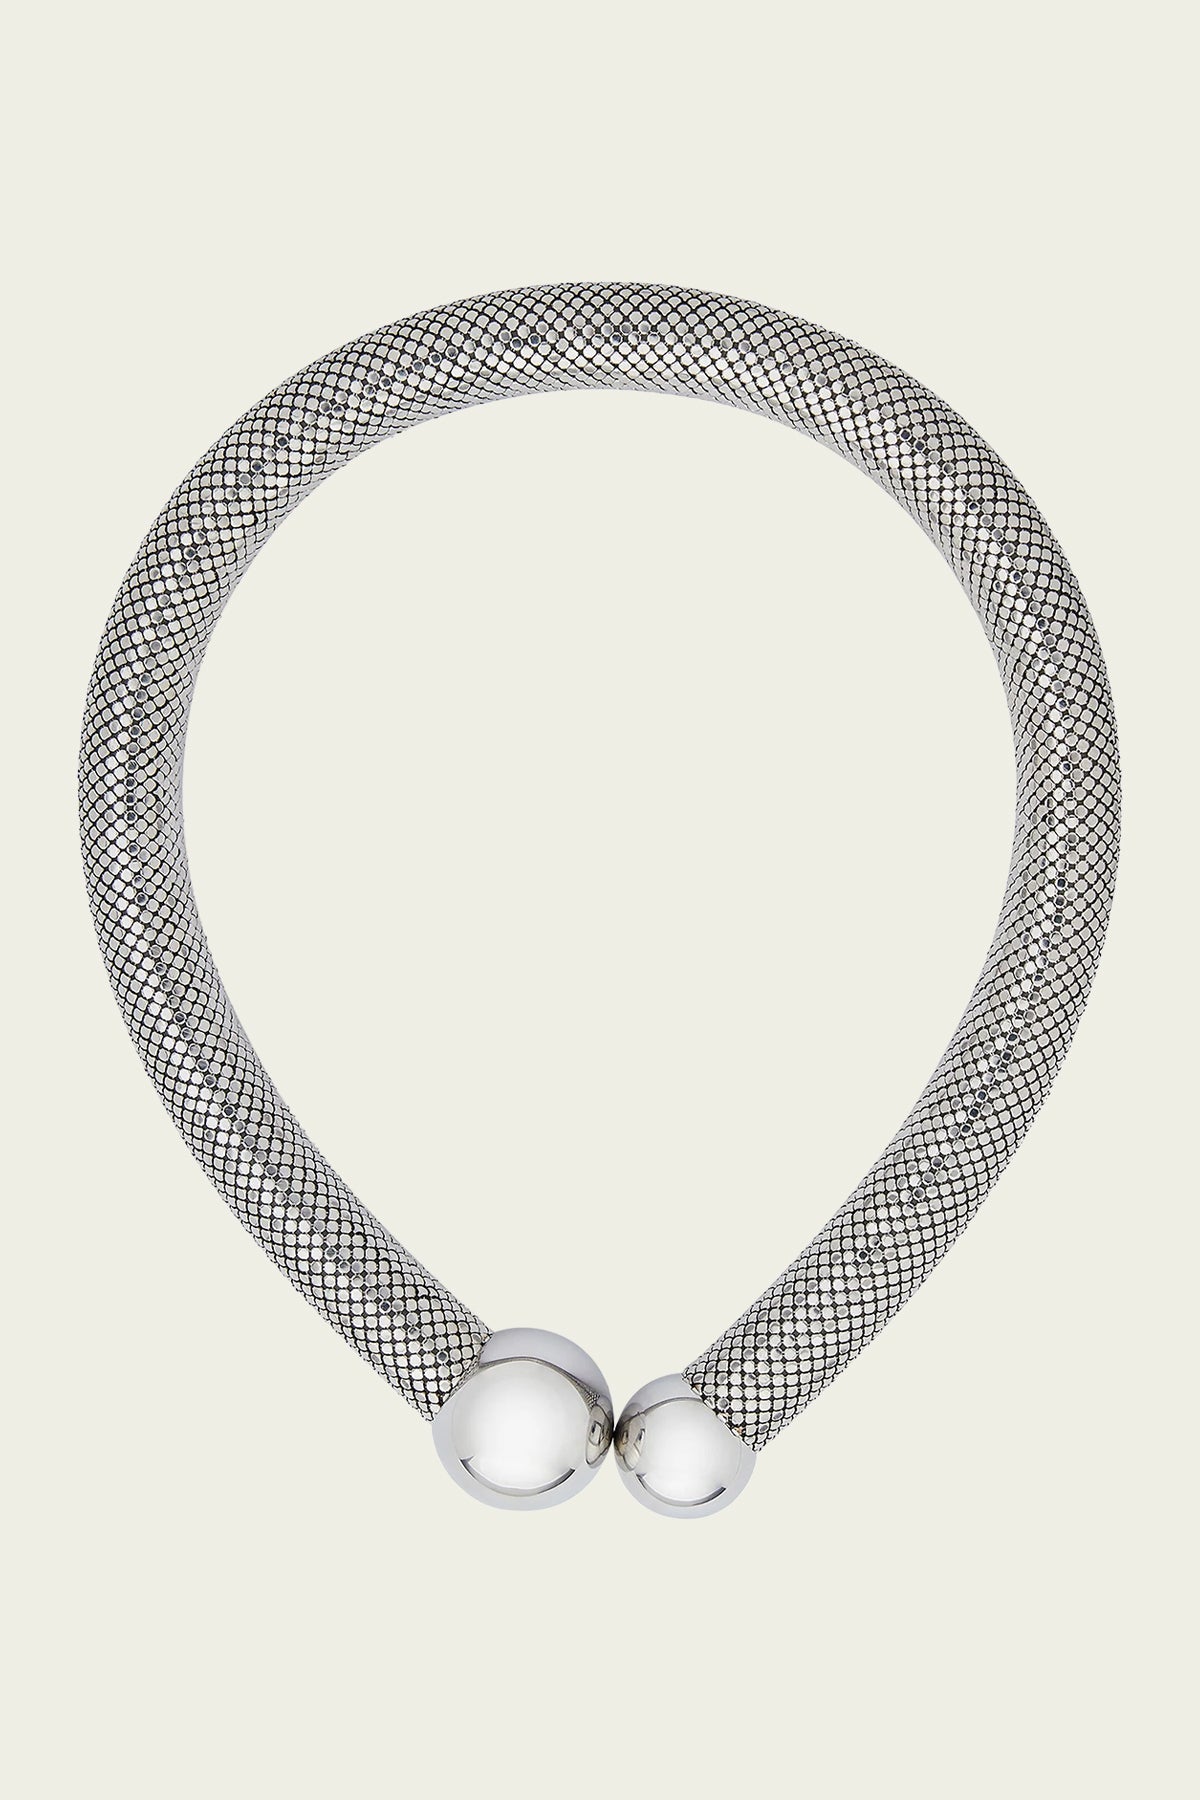 Pixel Chain-Mail Necklace in Silver - shop-olivia.com